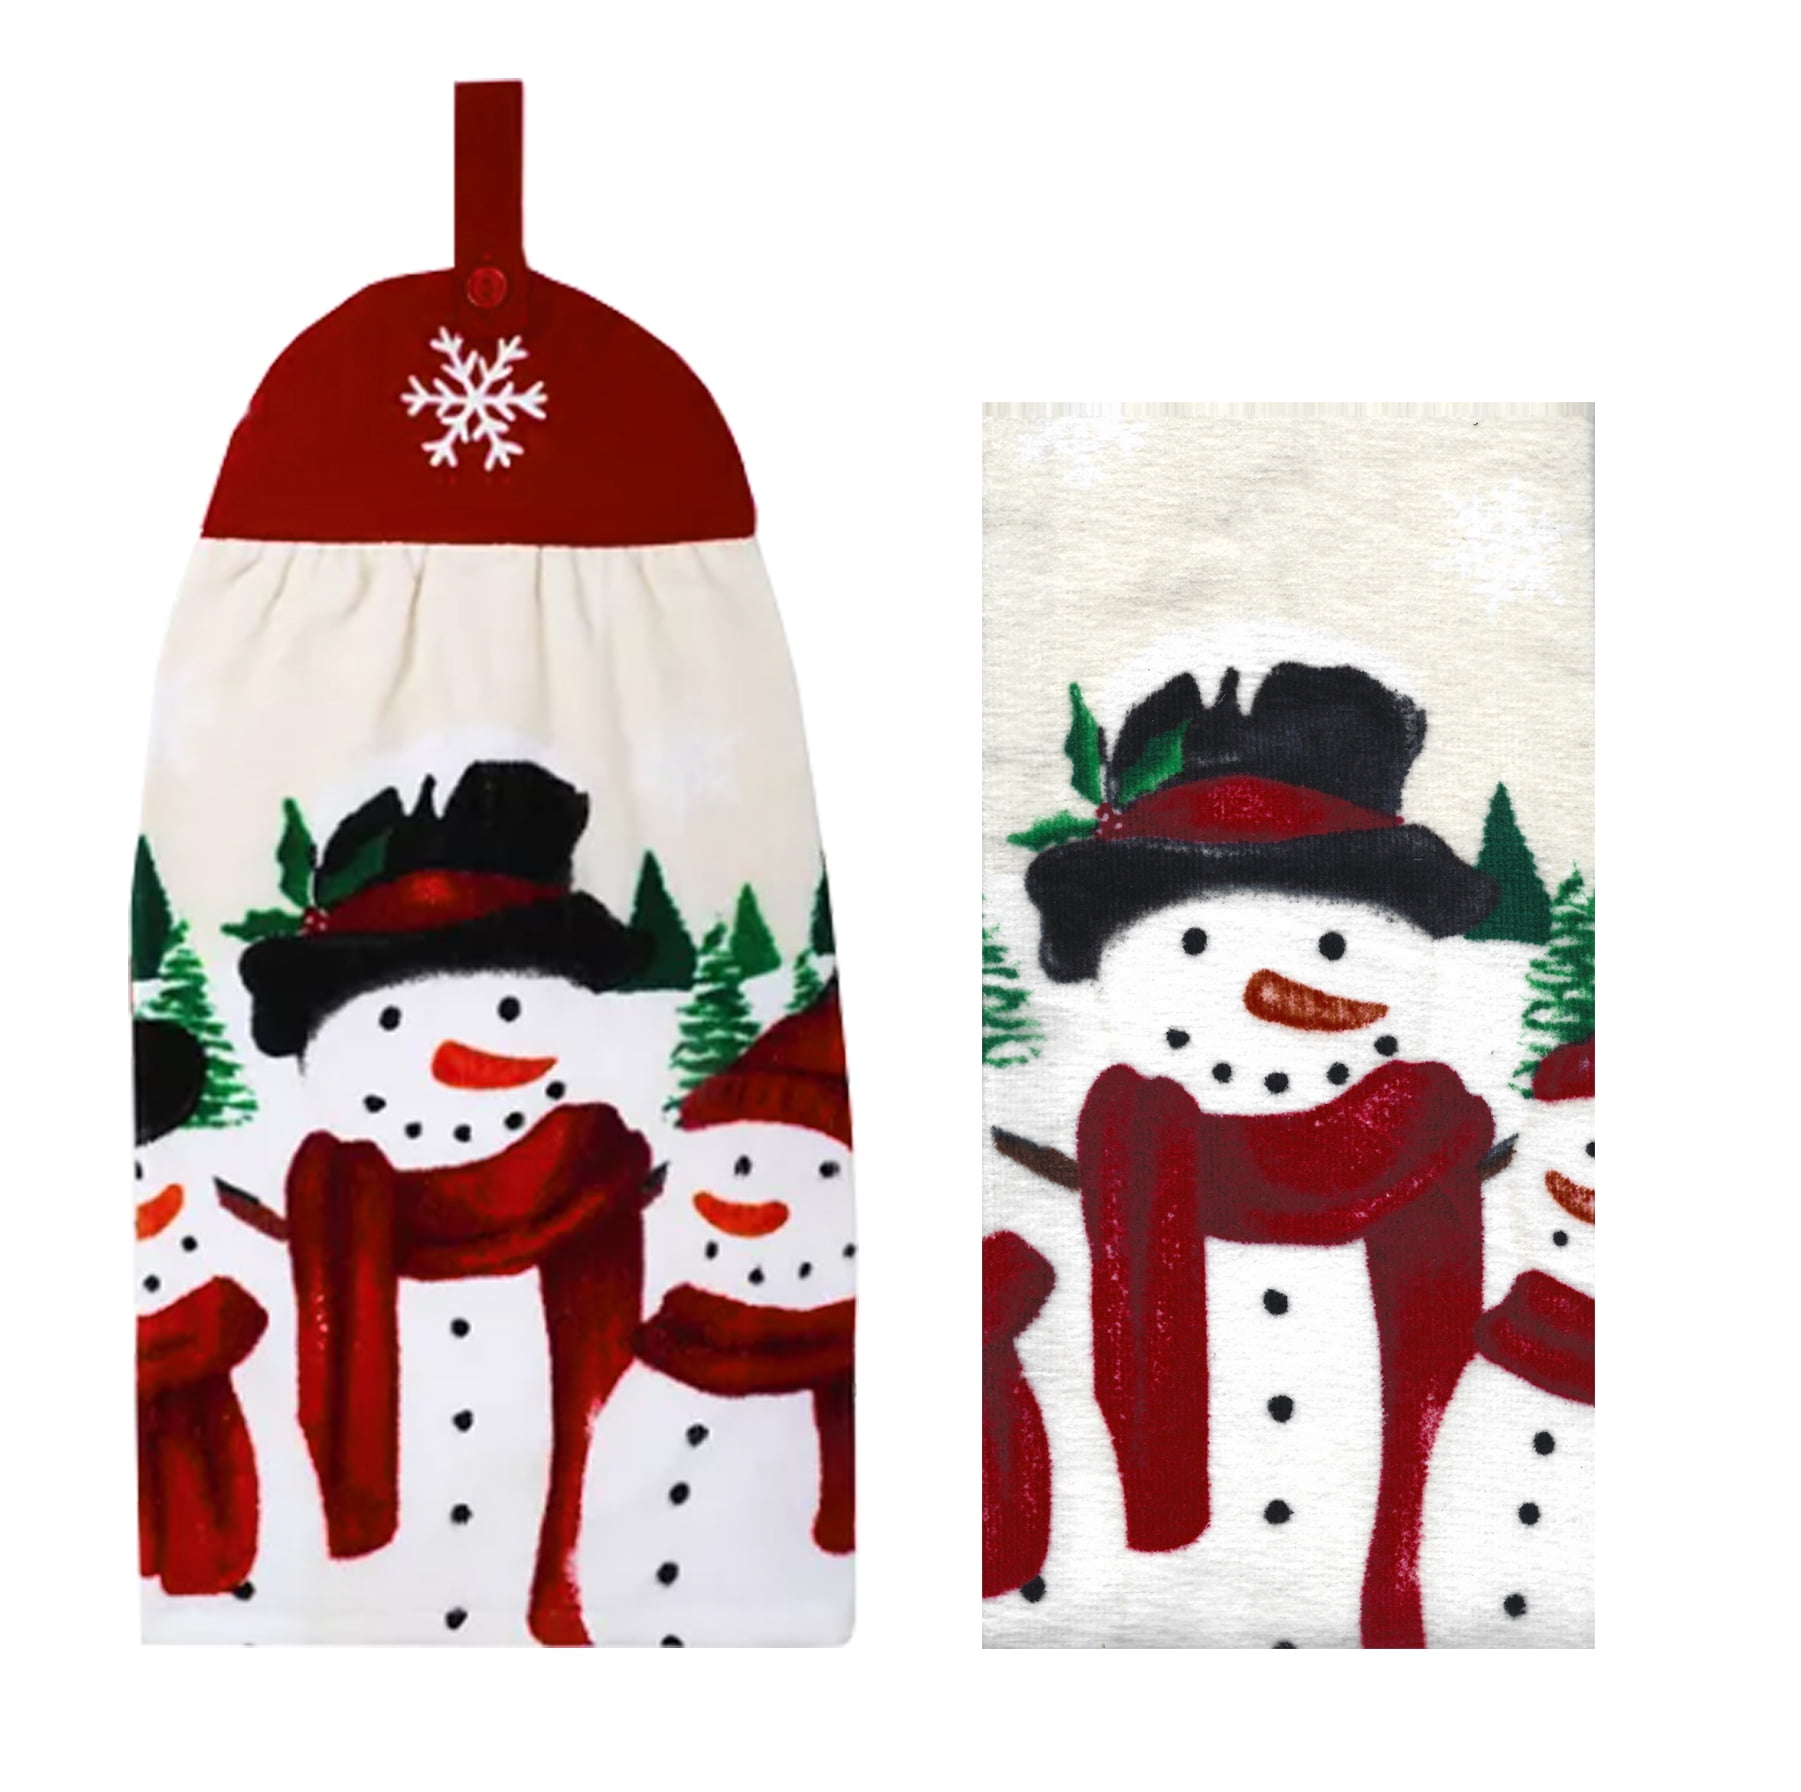 SNOWMAN HEAD Holiday Christmas Kitchen Towel 5 Pack by St Nicholas Square NWT 